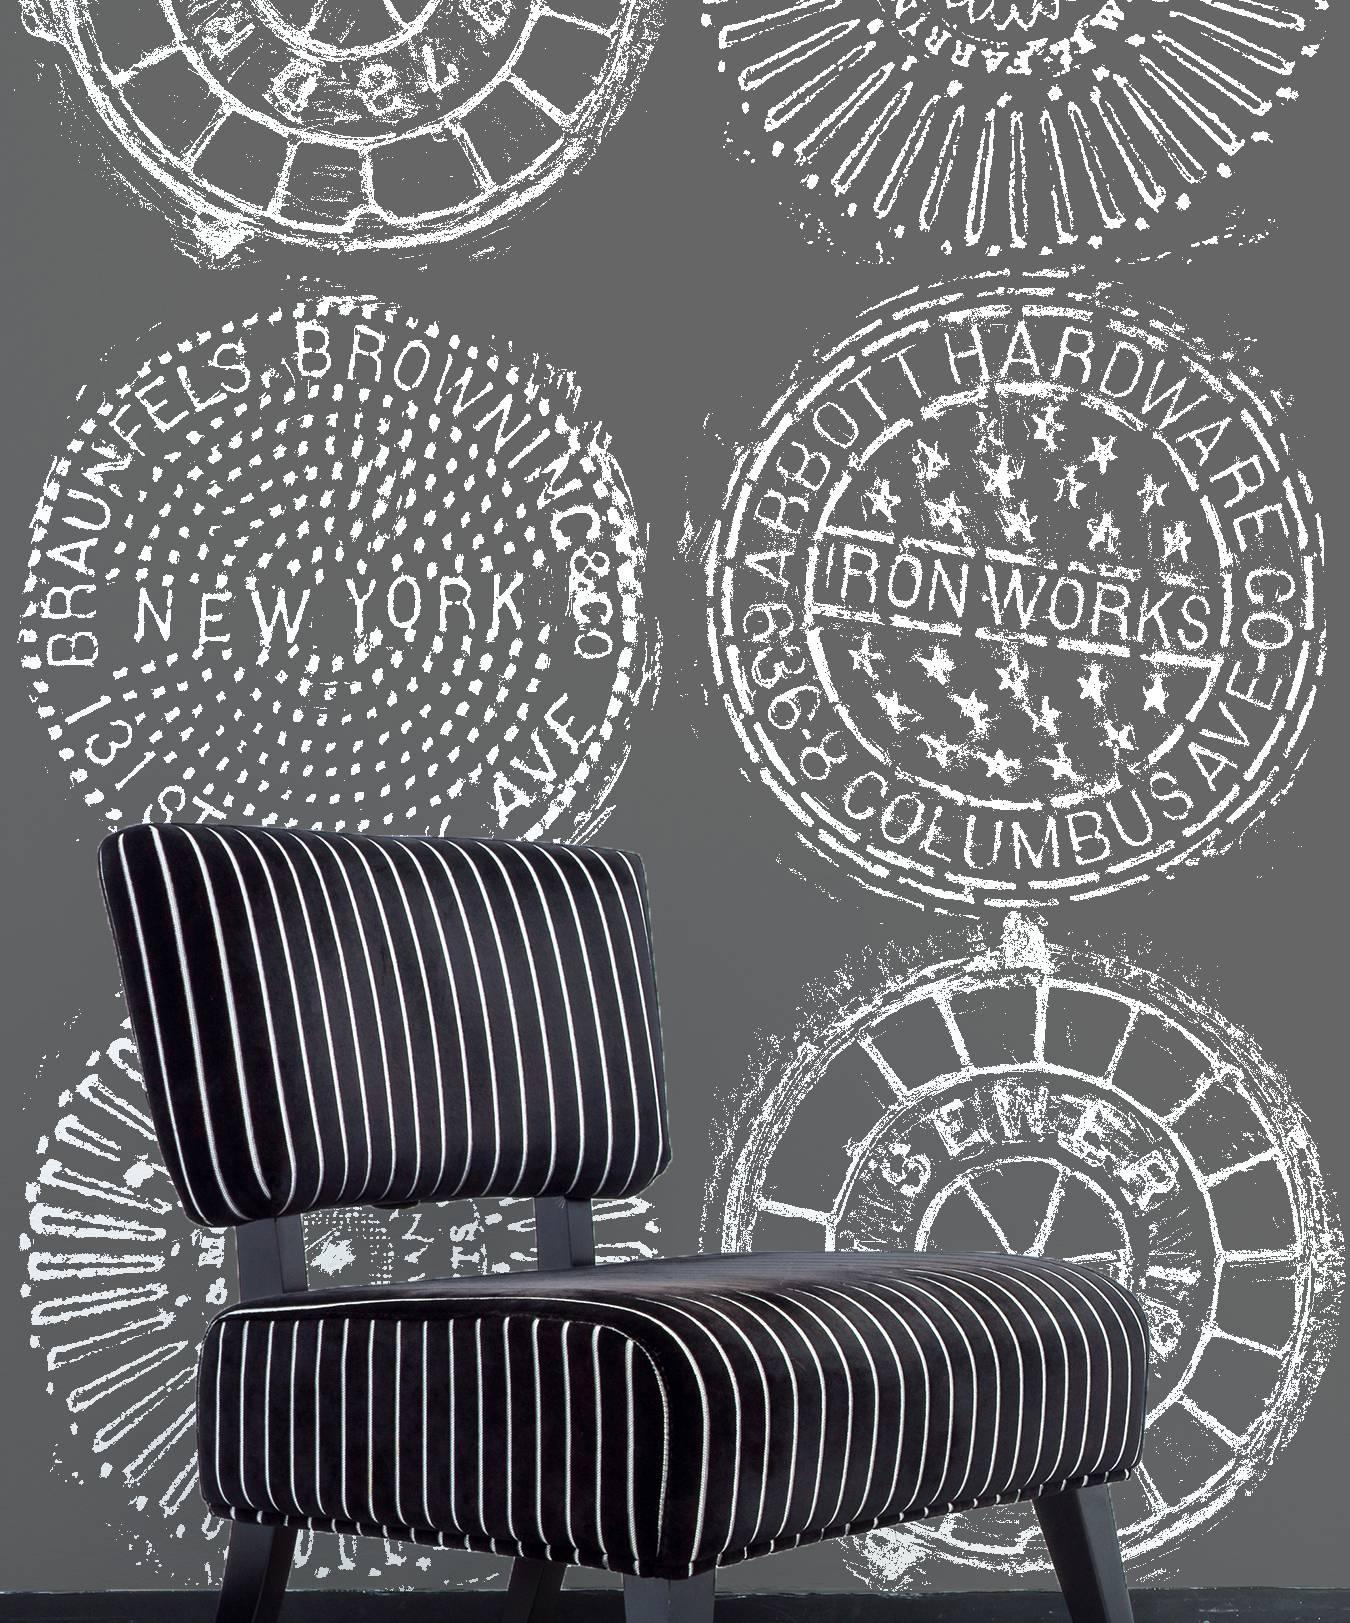 Contemporary NYC Manhole Printed Wallpaper, Black on White Manhole Cover For Sale